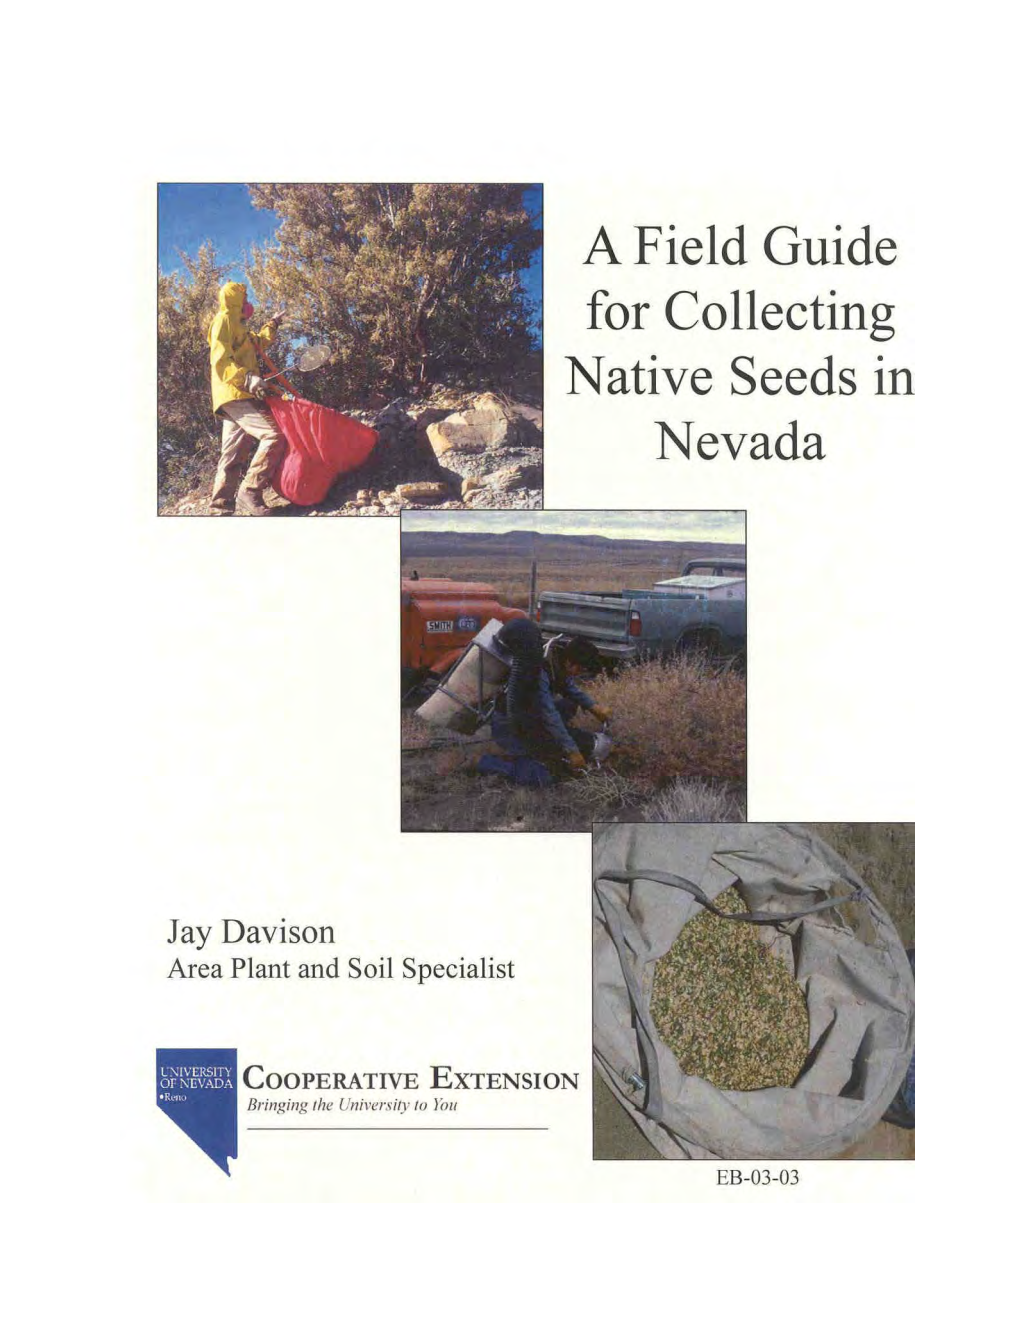 A Field Guide for Collecting Native Seeds in Nevada